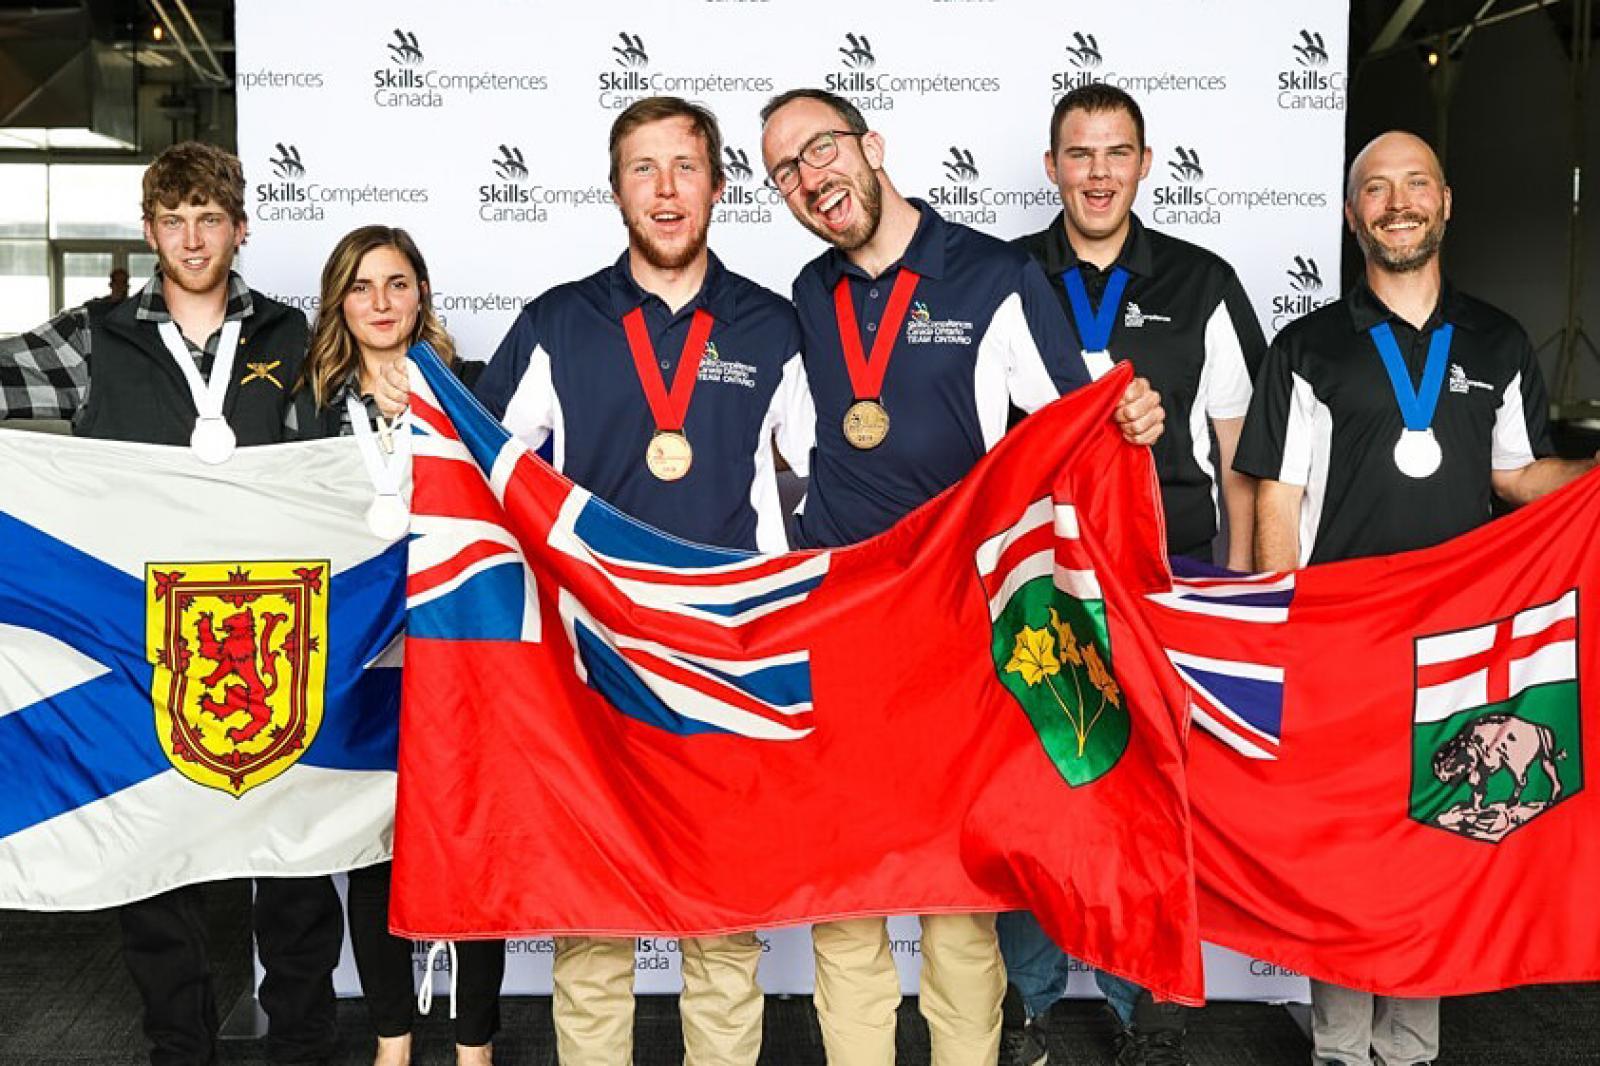 Ontario students win national gold